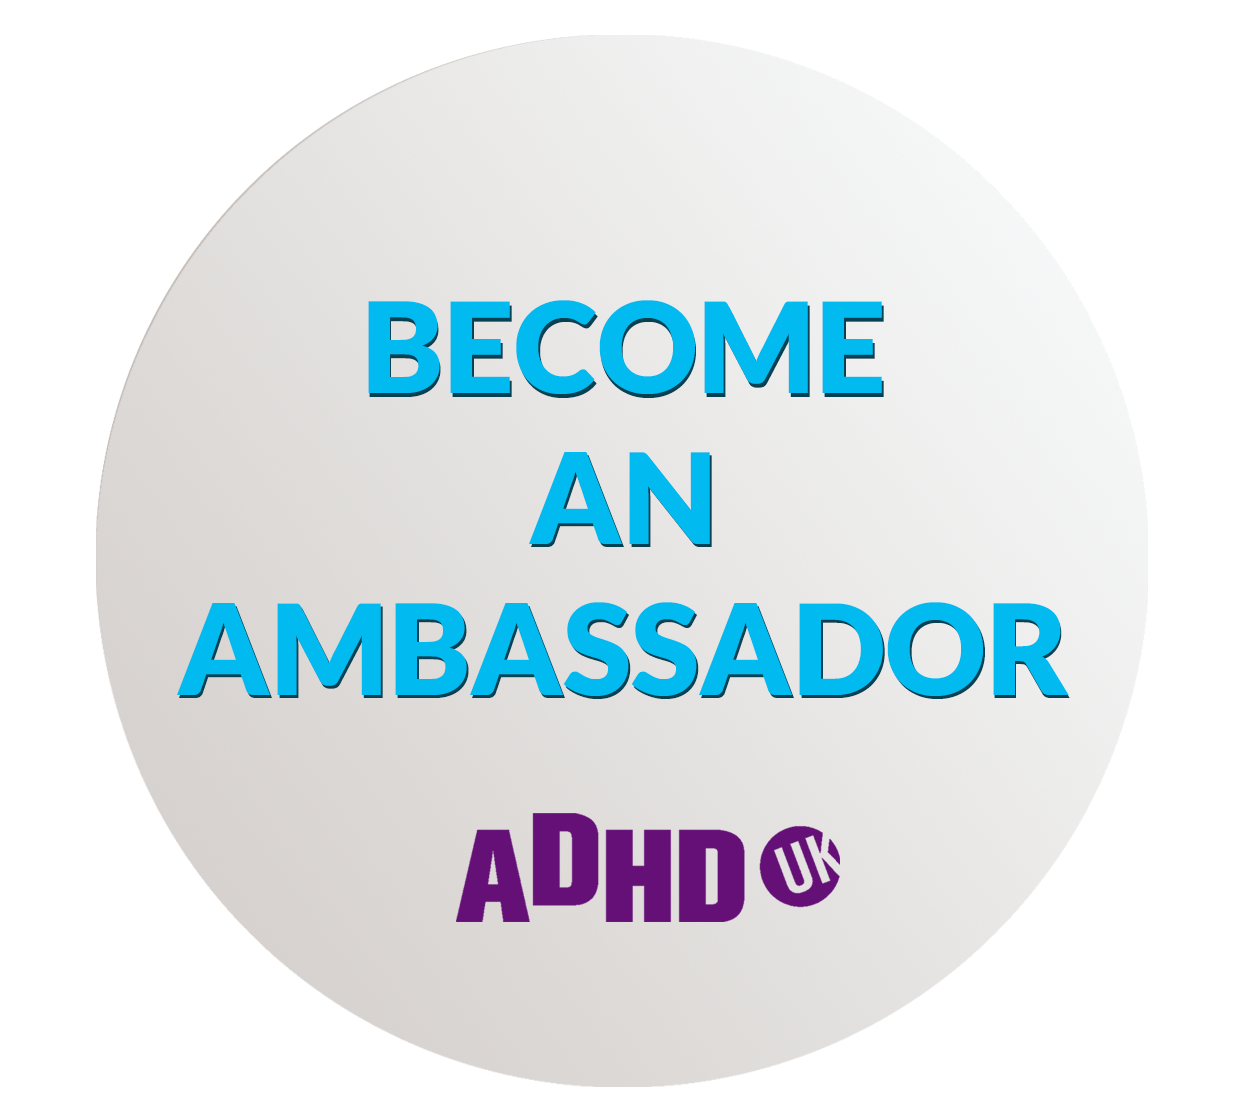 Want to help? Become an Ambassador for ADHD UK